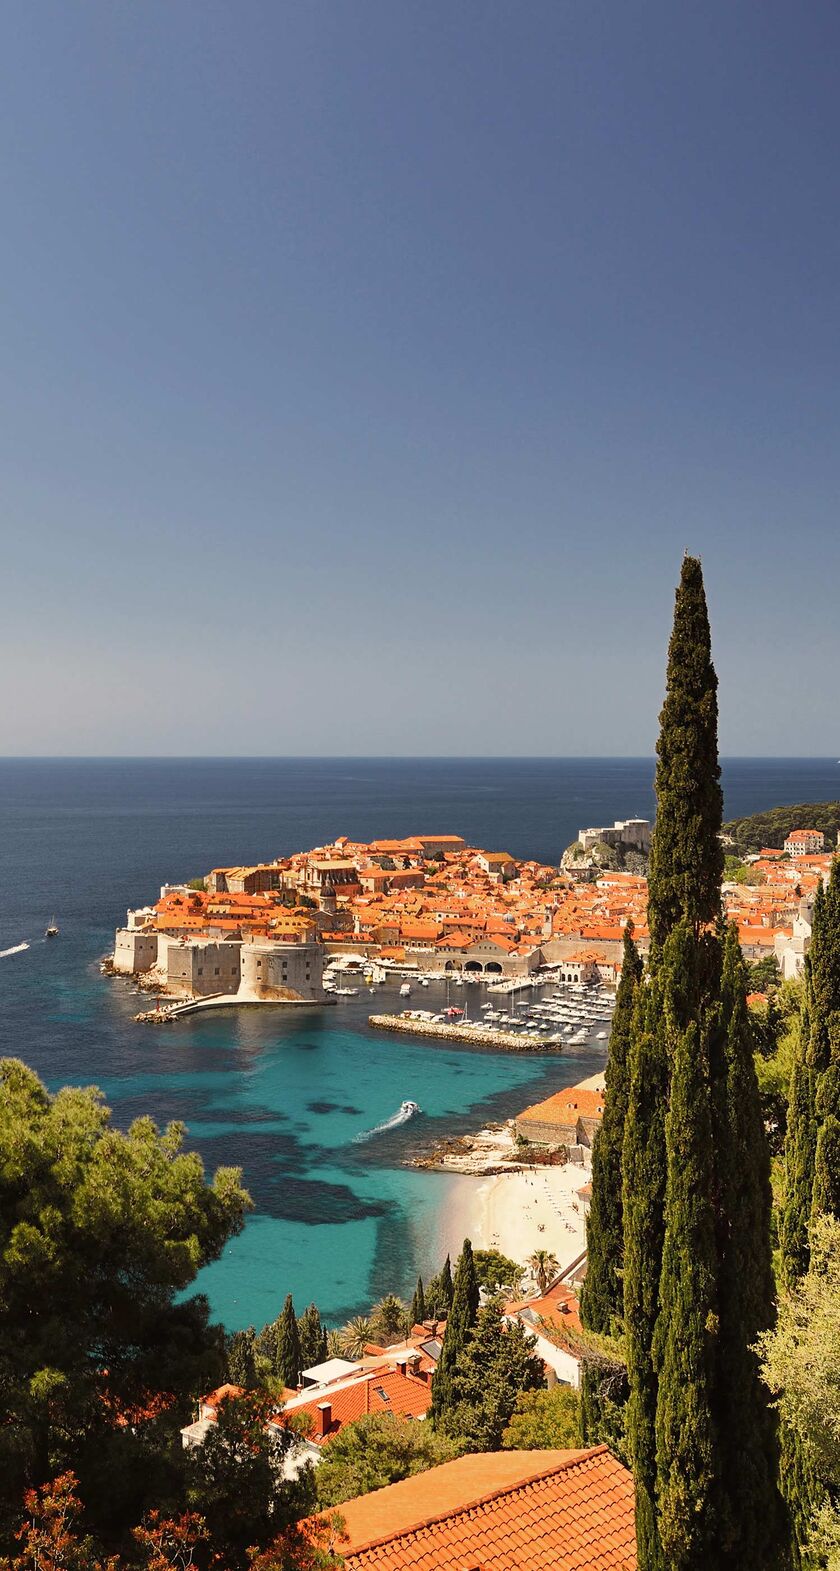 A panoramic view of Dubrovnik, Croatia, with its distinctive orange-roofed buildings surrounded by the Adriatic Sea,